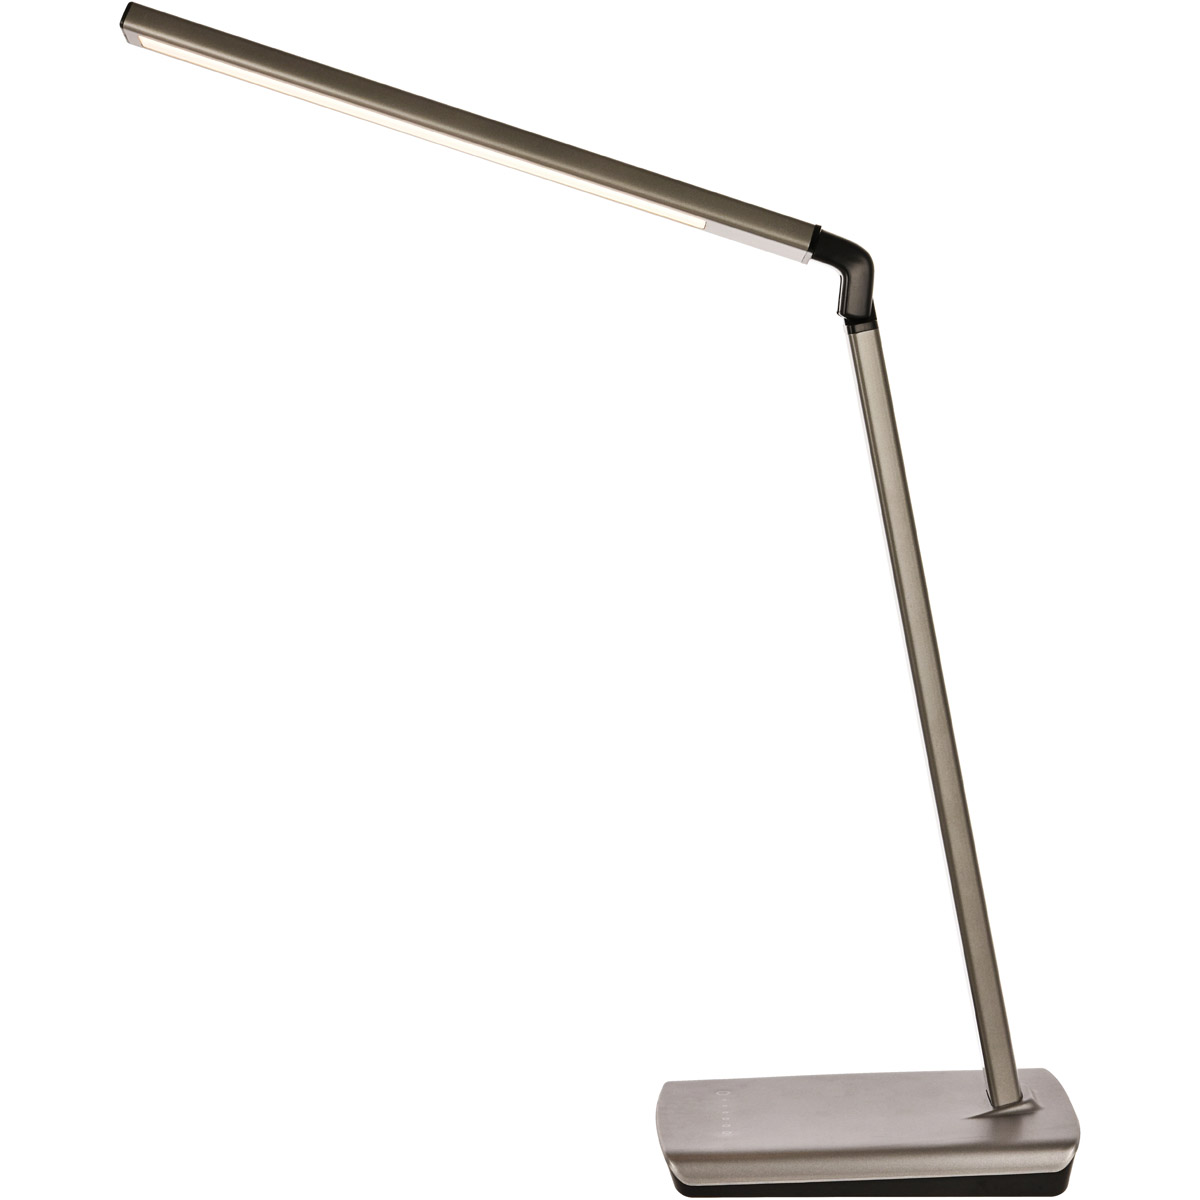 Ledds001 Sleek Led Desk Lamp With Smooth Touch Dimmer & Usb, Metallic Grey